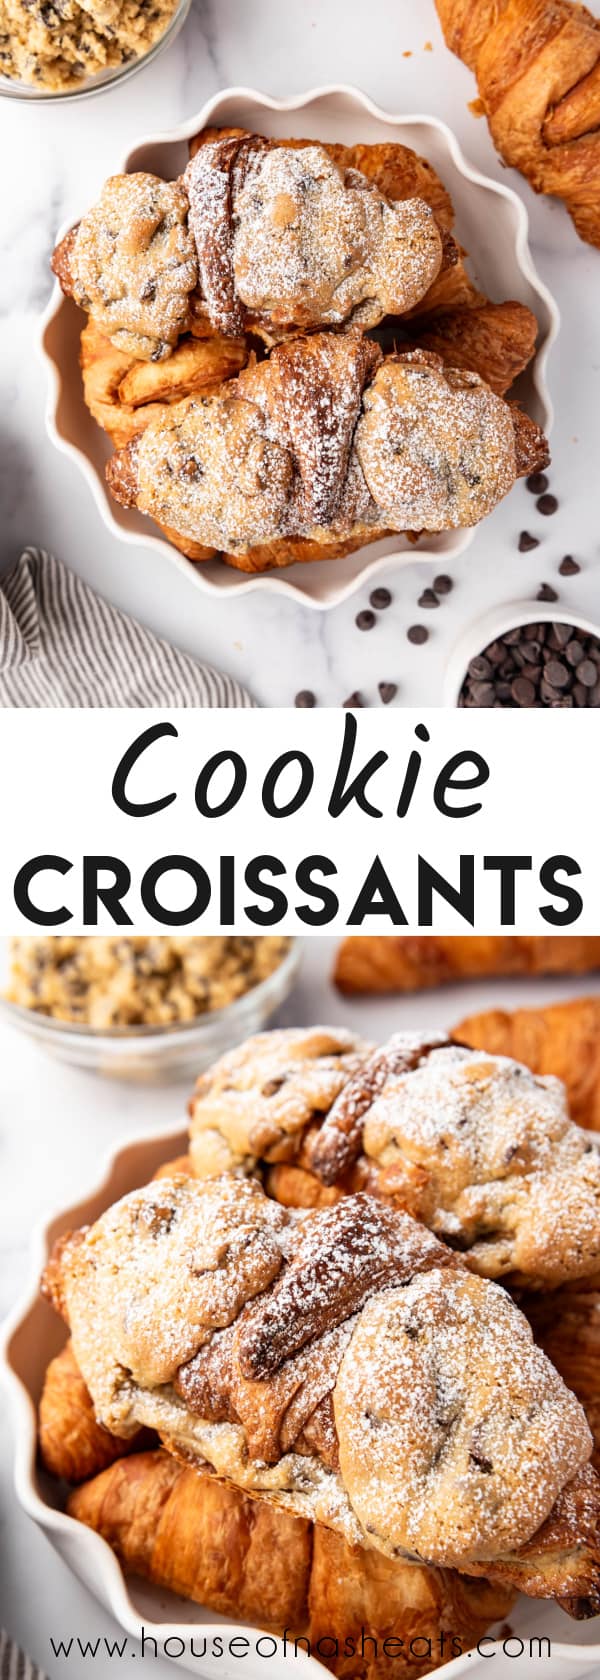 A collage of images of cookie croissants with text overlay.